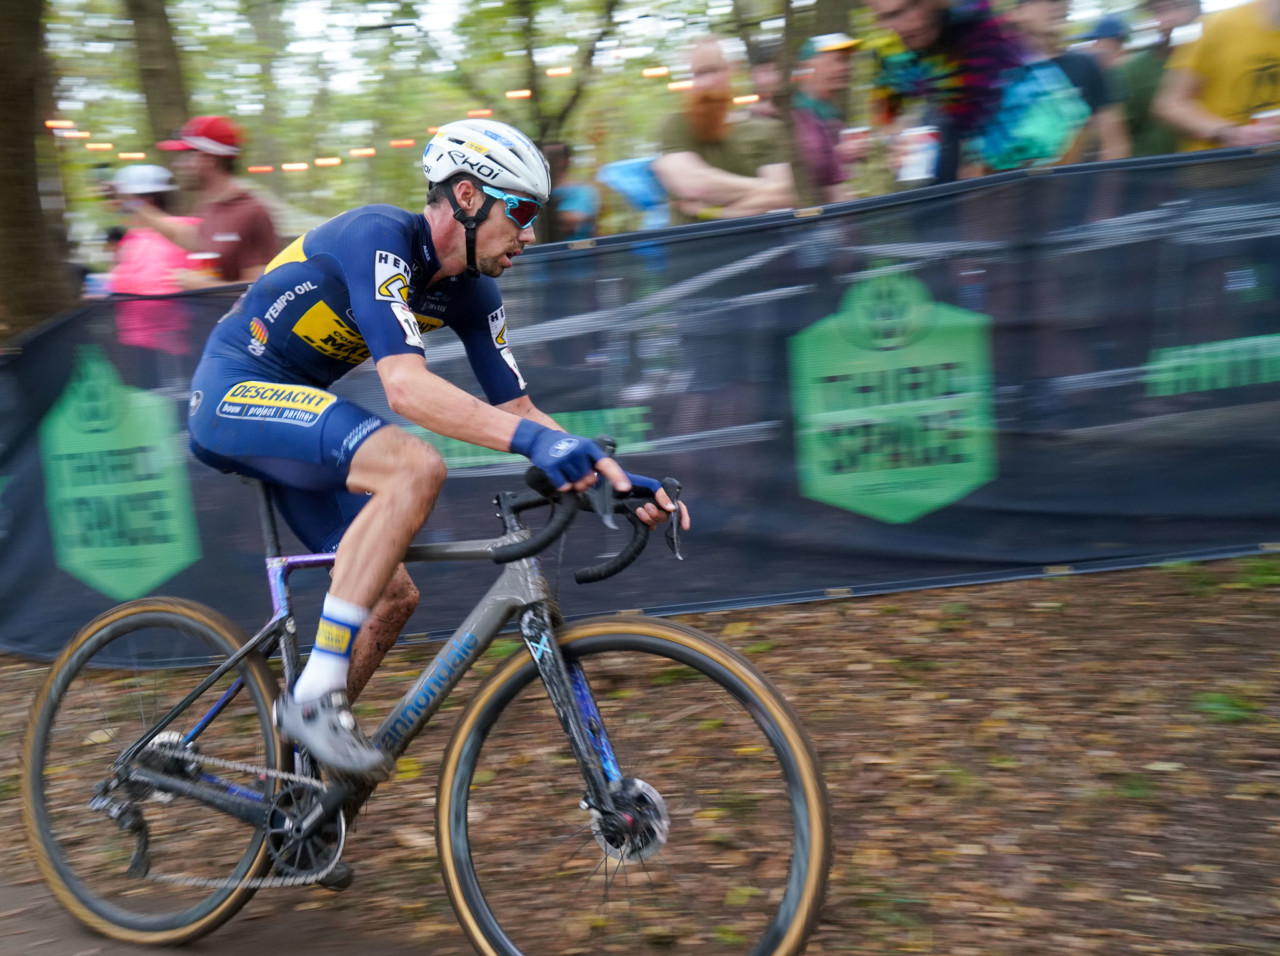 Vincent Baestaens may not have won, but finished 7th to continue his impressive U.S. campaign. 2021 UCI Cyclocross World Cup Waterloo, Elite Men. © D. Mable / Cyclocross Magazine